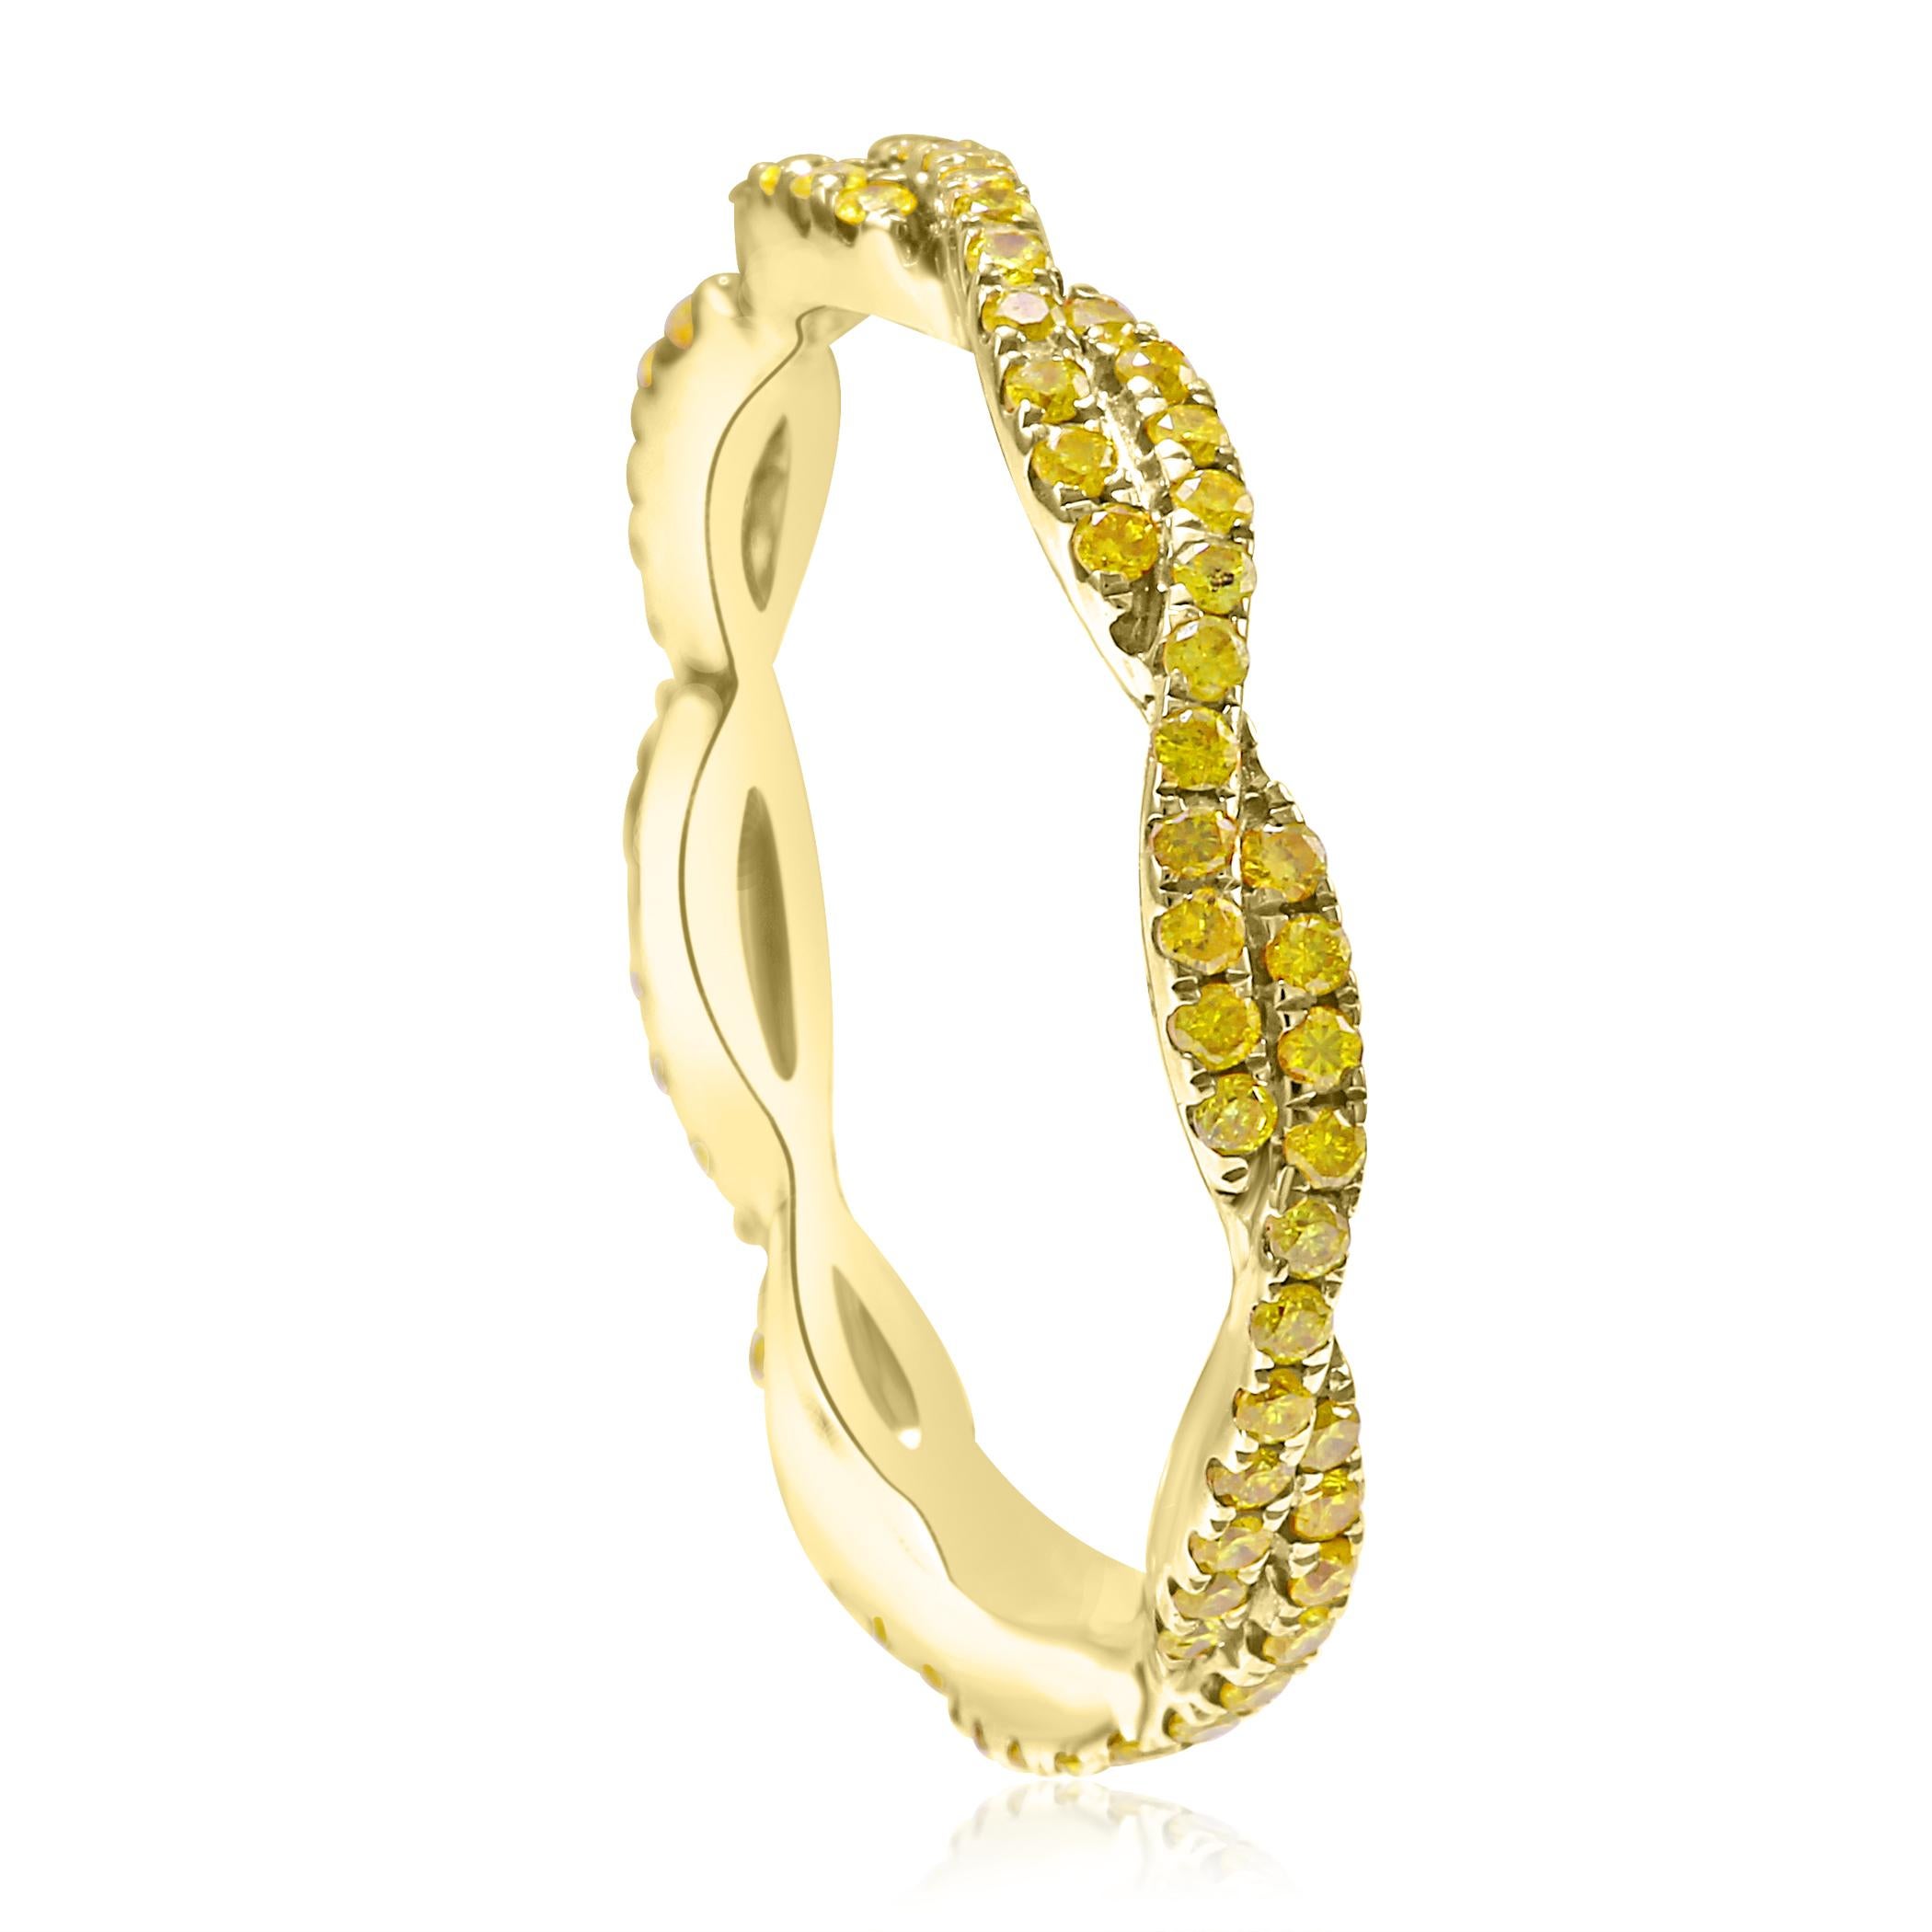 Round Cut Natural Fancy Yellow Diamond Twisted Rope Style Gold Stackable Band Fashion Ring